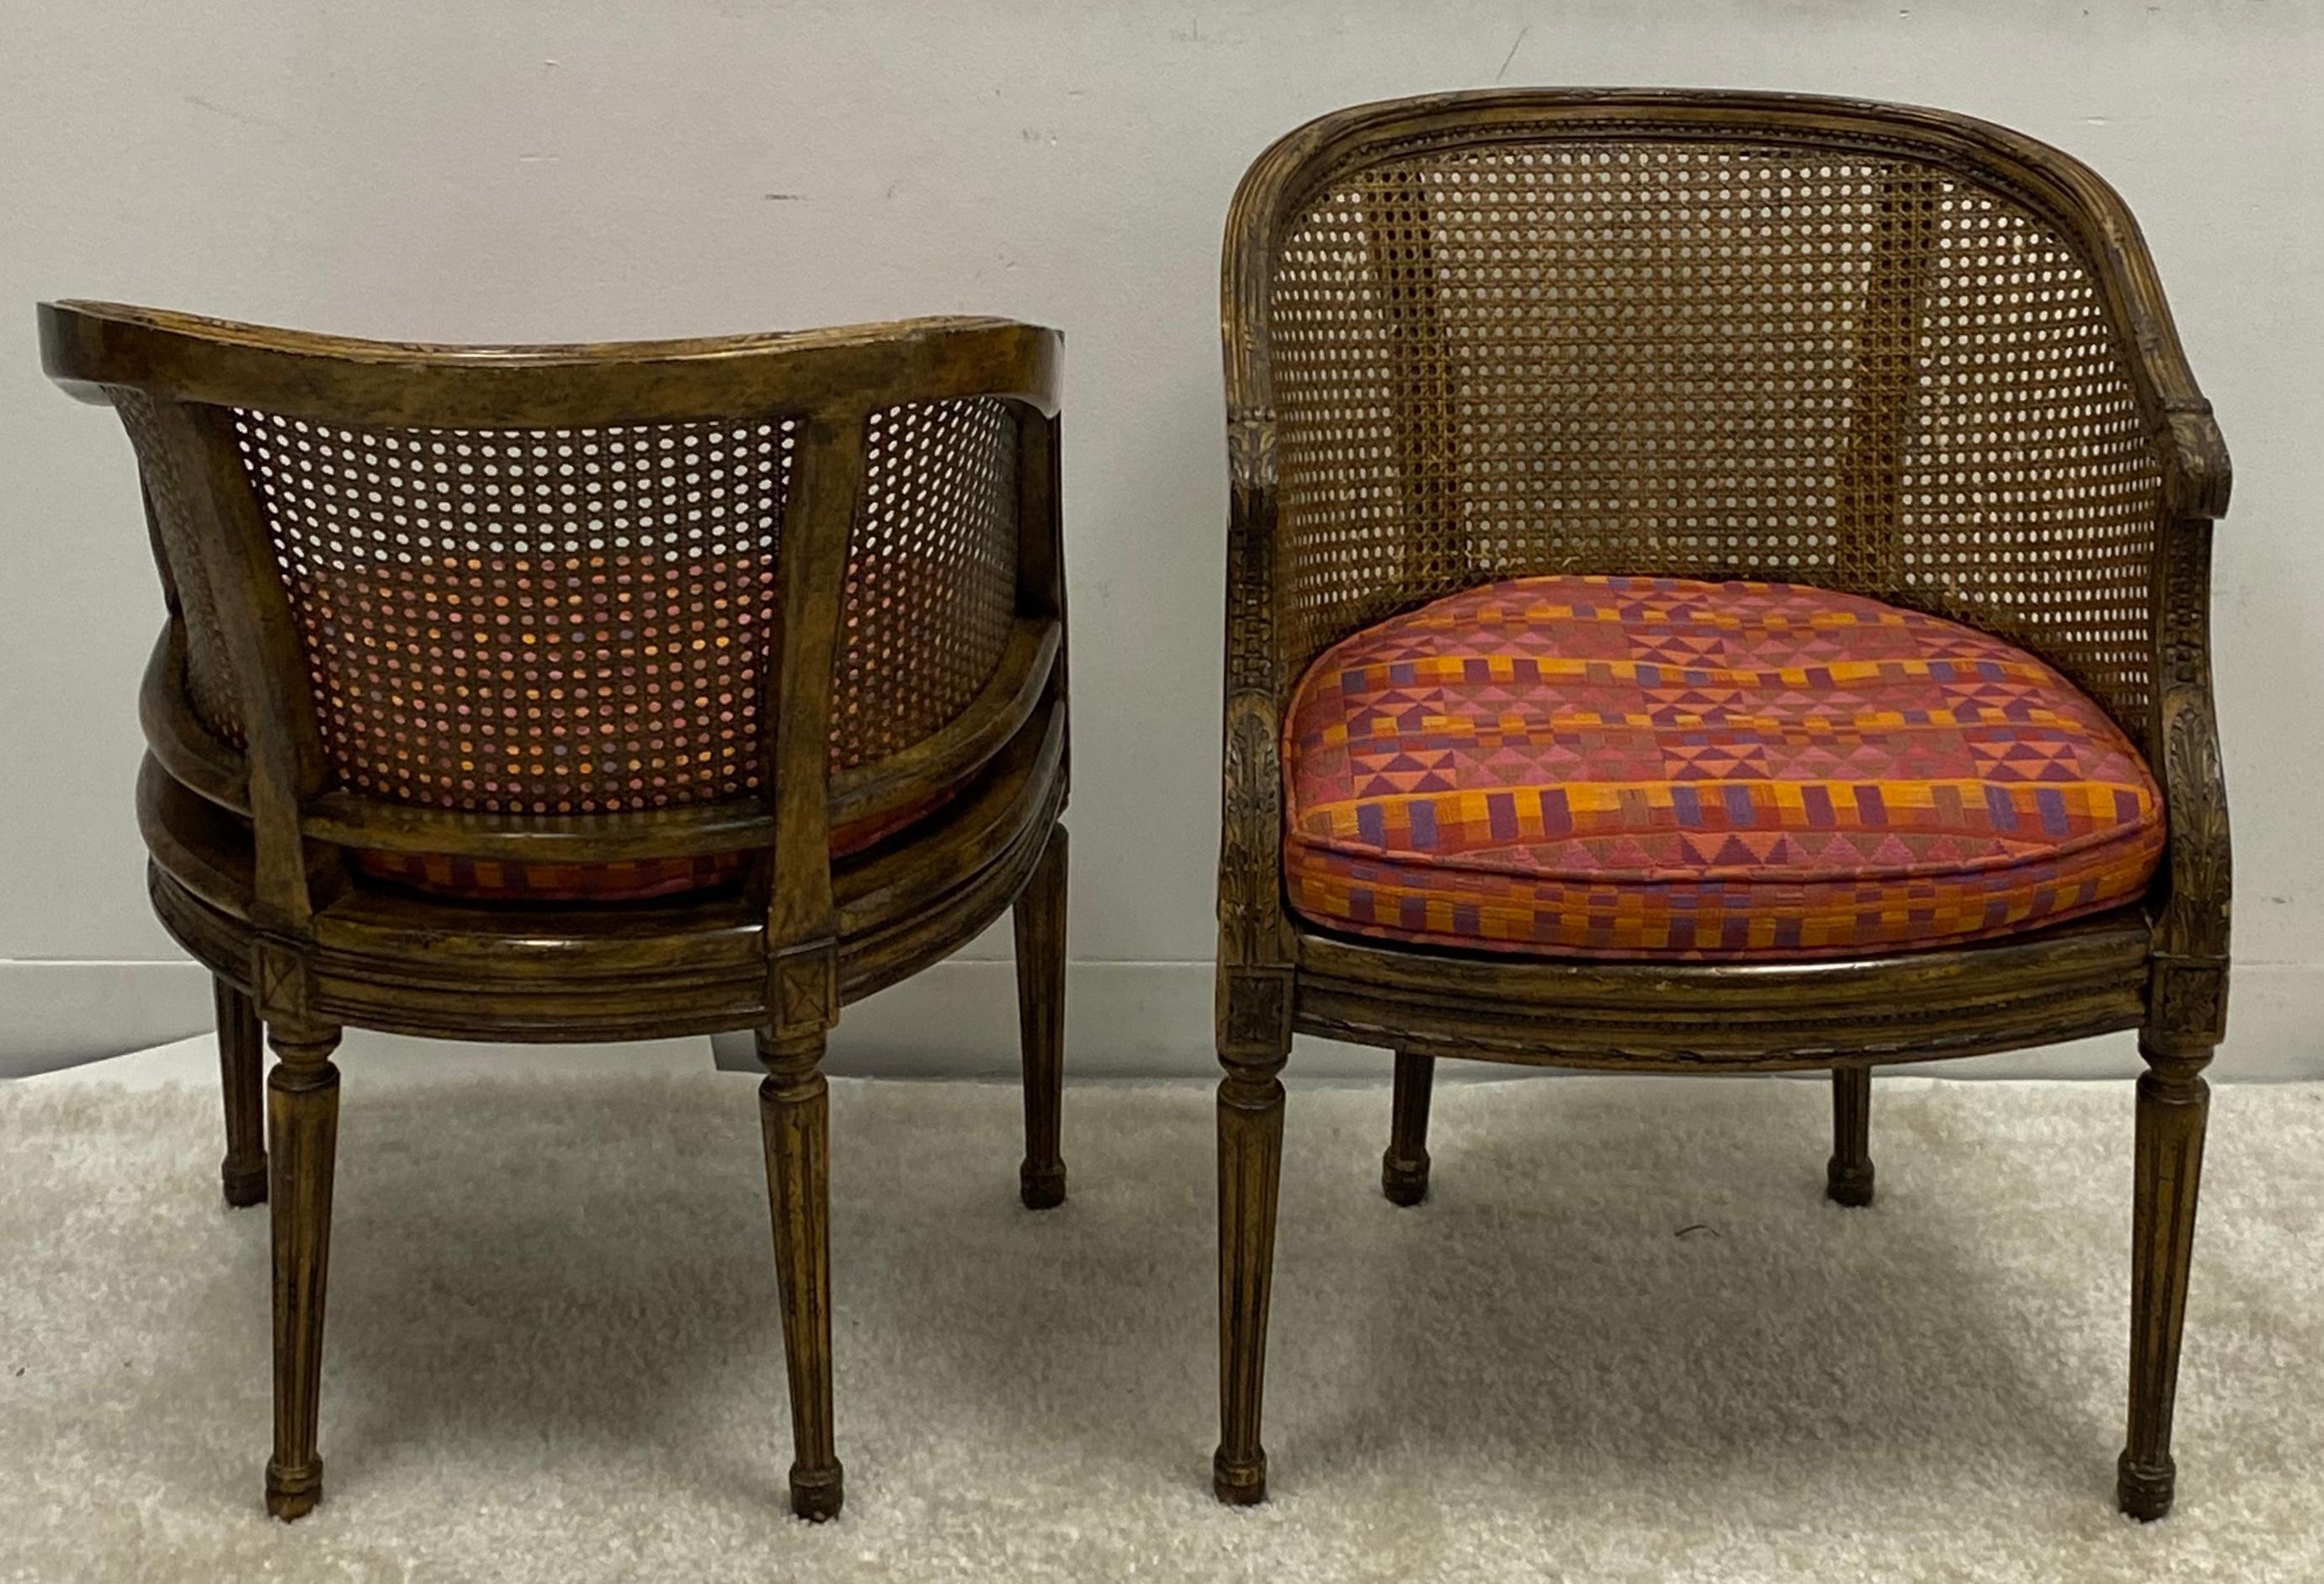 American French Louis XVI Style Caned Fruitwood Chairs Att. to Lewis Mittman, Pair